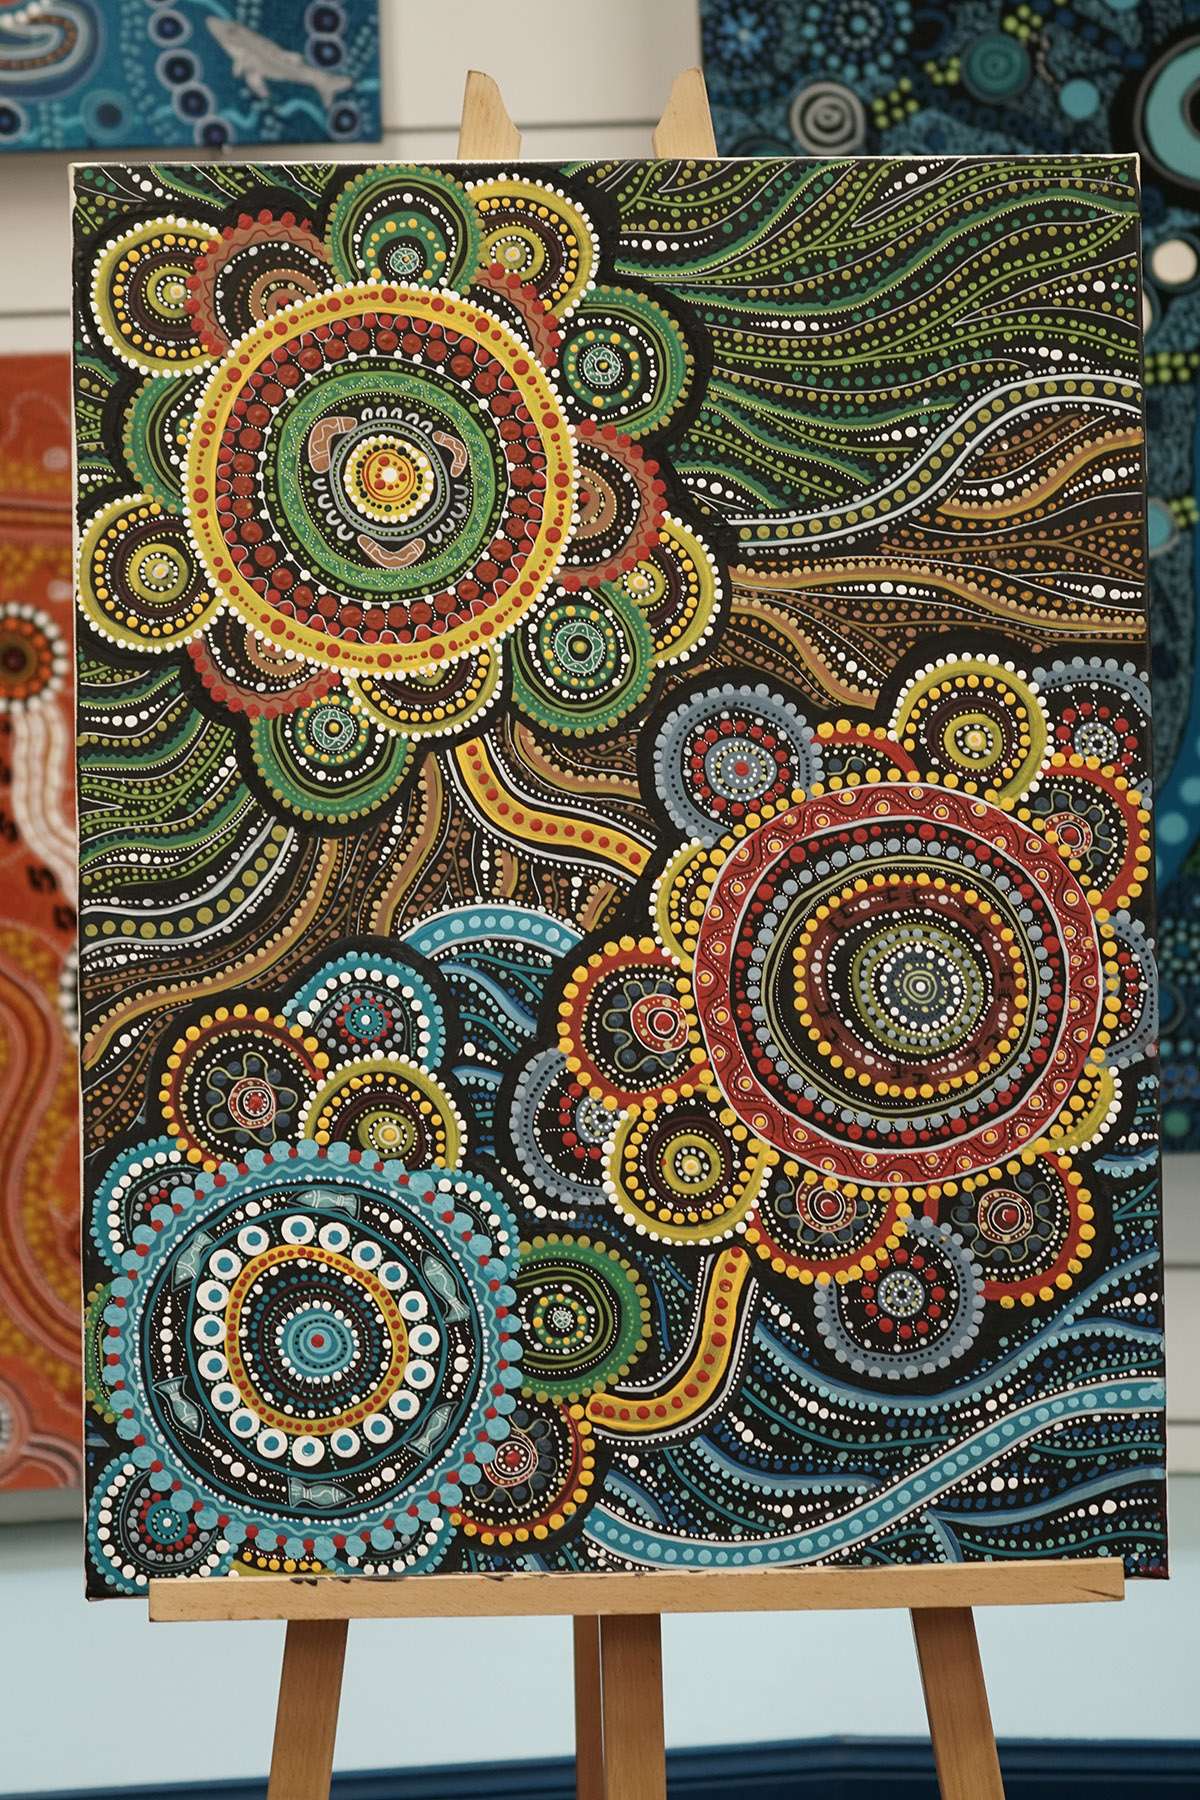 ‘Darunga Mudang’, meaning ‘celebrate life’ – artwork developed in collaboration with Indigenous artists, Dalmarri, which reflects Diageo’s three main sites in Australia – Bundaberg Rum Distillery (top green circle), Huntingwood Packaging and Distribution (middle grey circle), and Sydney HQ (bottom blue circle).